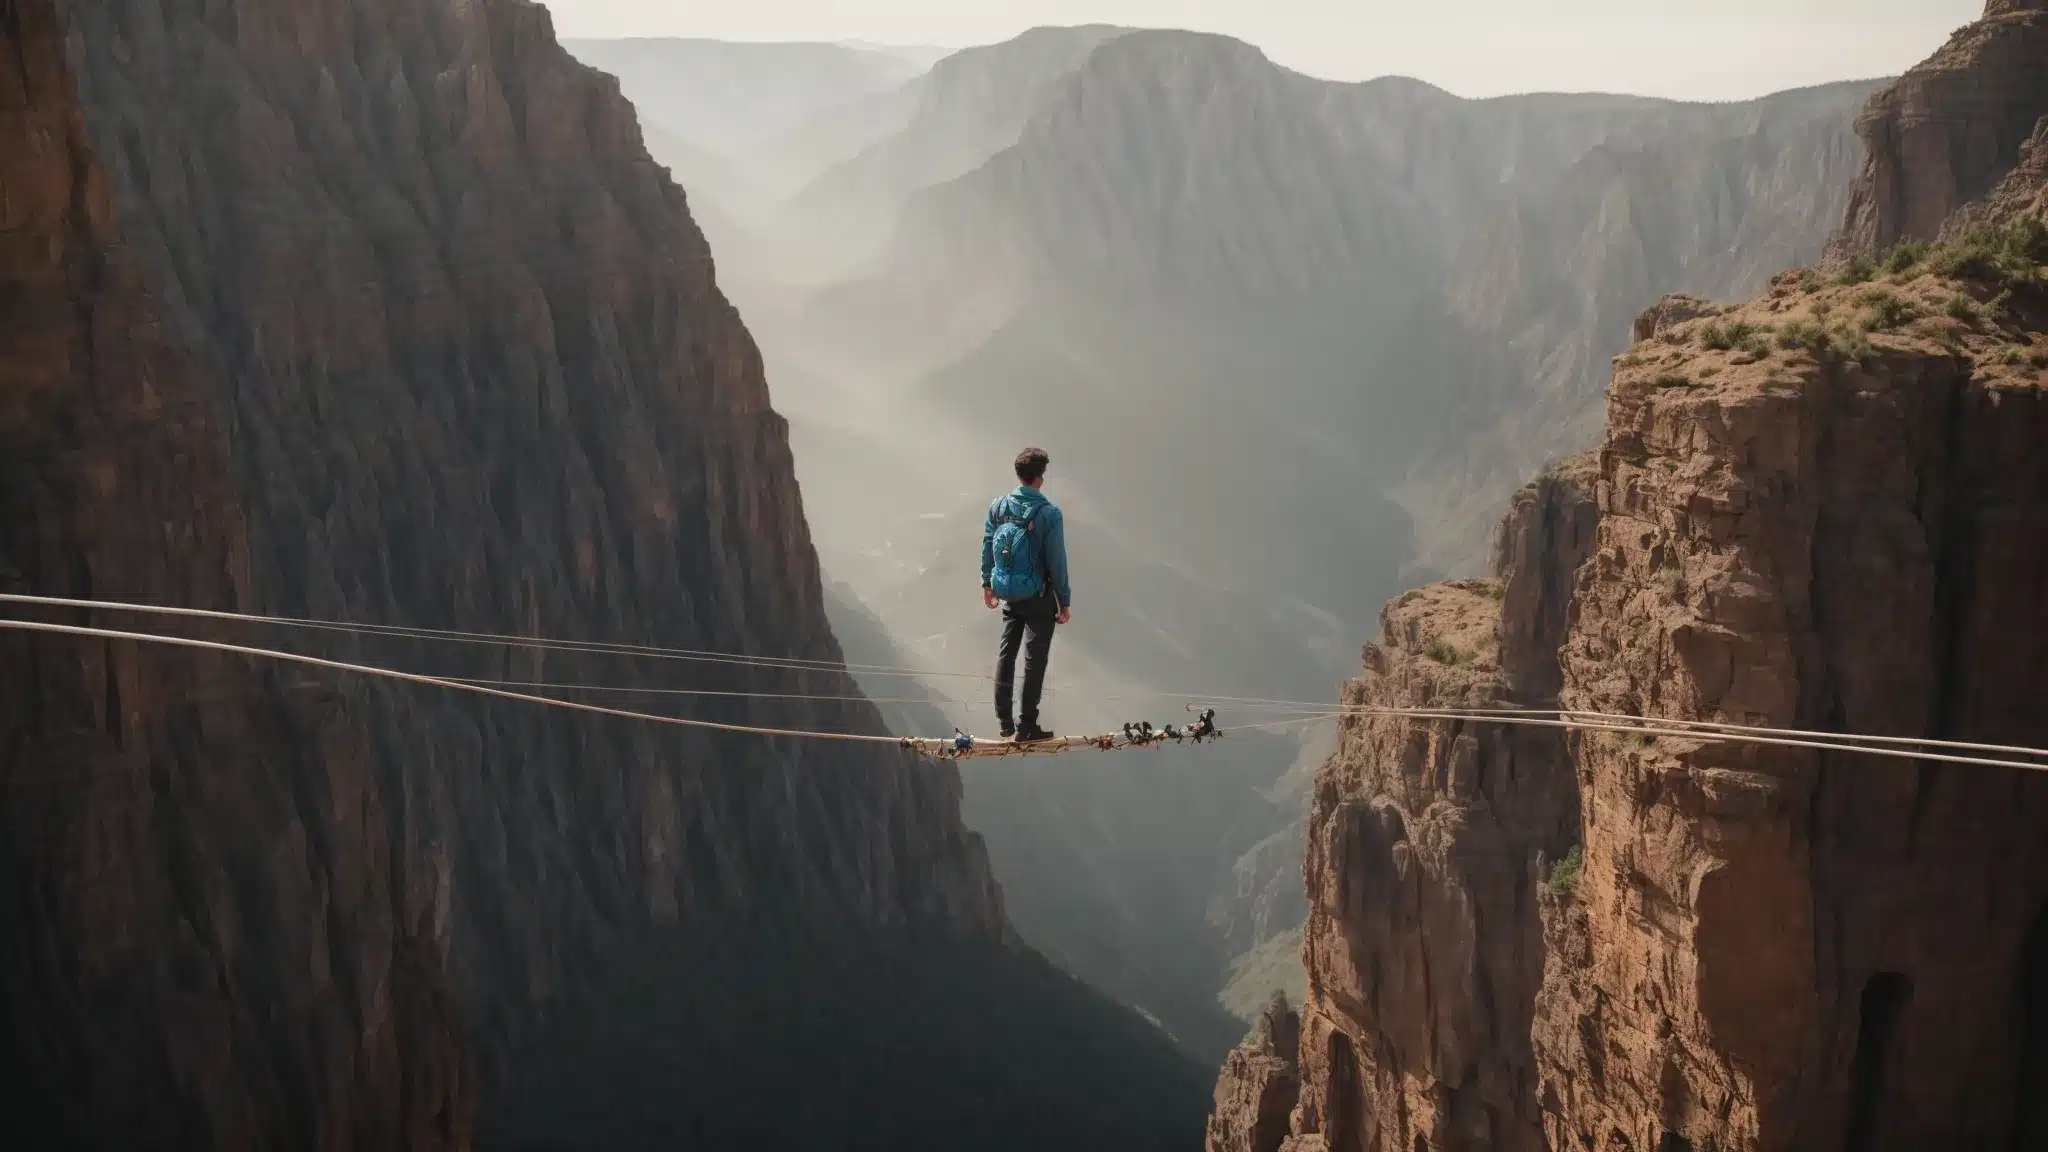 a tightrope walker balances precariously over a chasm, encapsulating the tension and focus needed to manage anxiety.